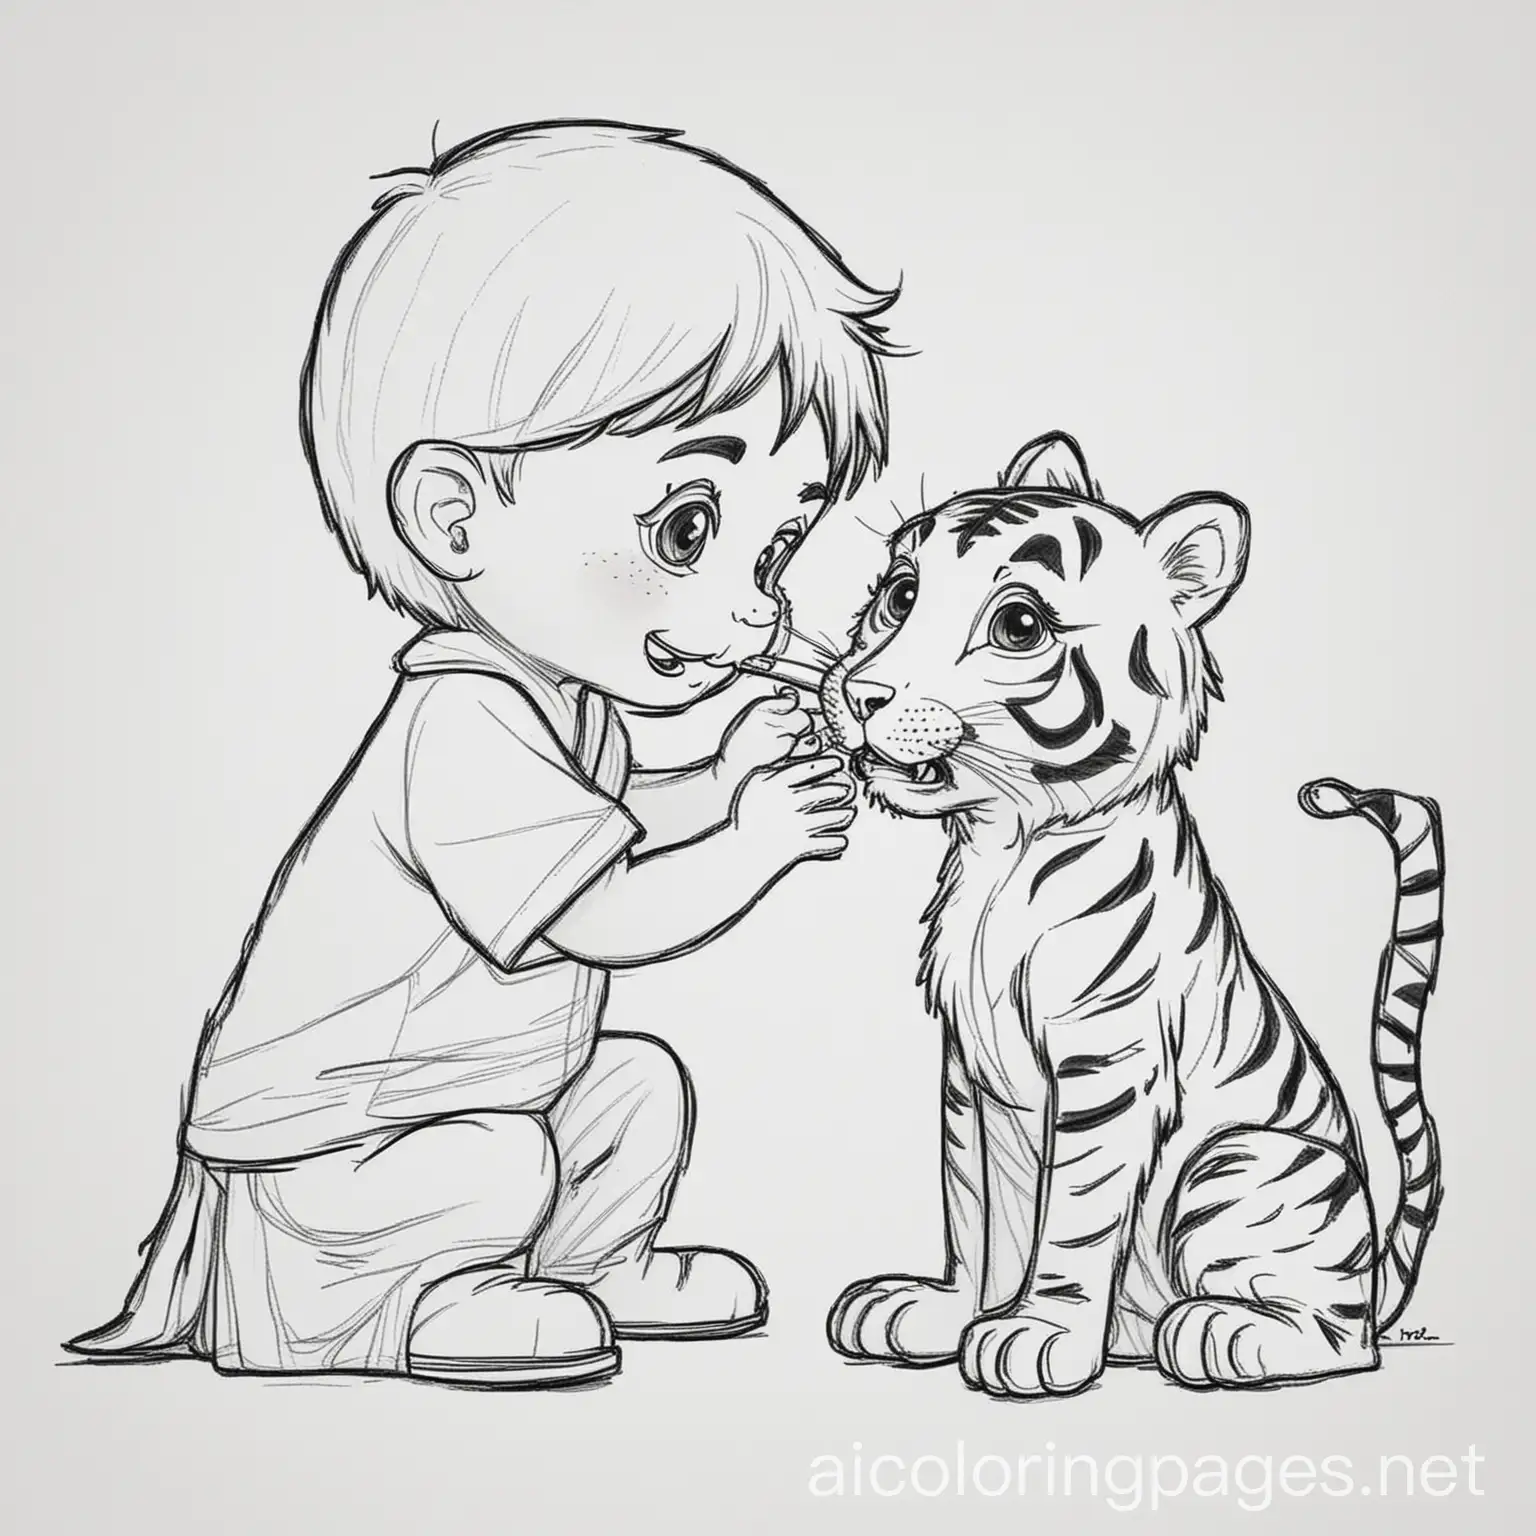 a boy feeding little baby tiger Coloring Page, black and white, line art, white background, Simplicity, Ample White Space. The background of the coloring page is plain white to make it easy for young children to color within the lines. The outlines of all the subjects are easy to distinguish, making it simple for kids to color without too much difficulty, Coloring Page, black and white, line art, white background, Simplicity, Ample White Space. The background of the coloring page is plain white to make it easy for young children to color within the lines. The outlines of all the subjects are easy to distinguish, making it simple for kids to color without too much difficulty